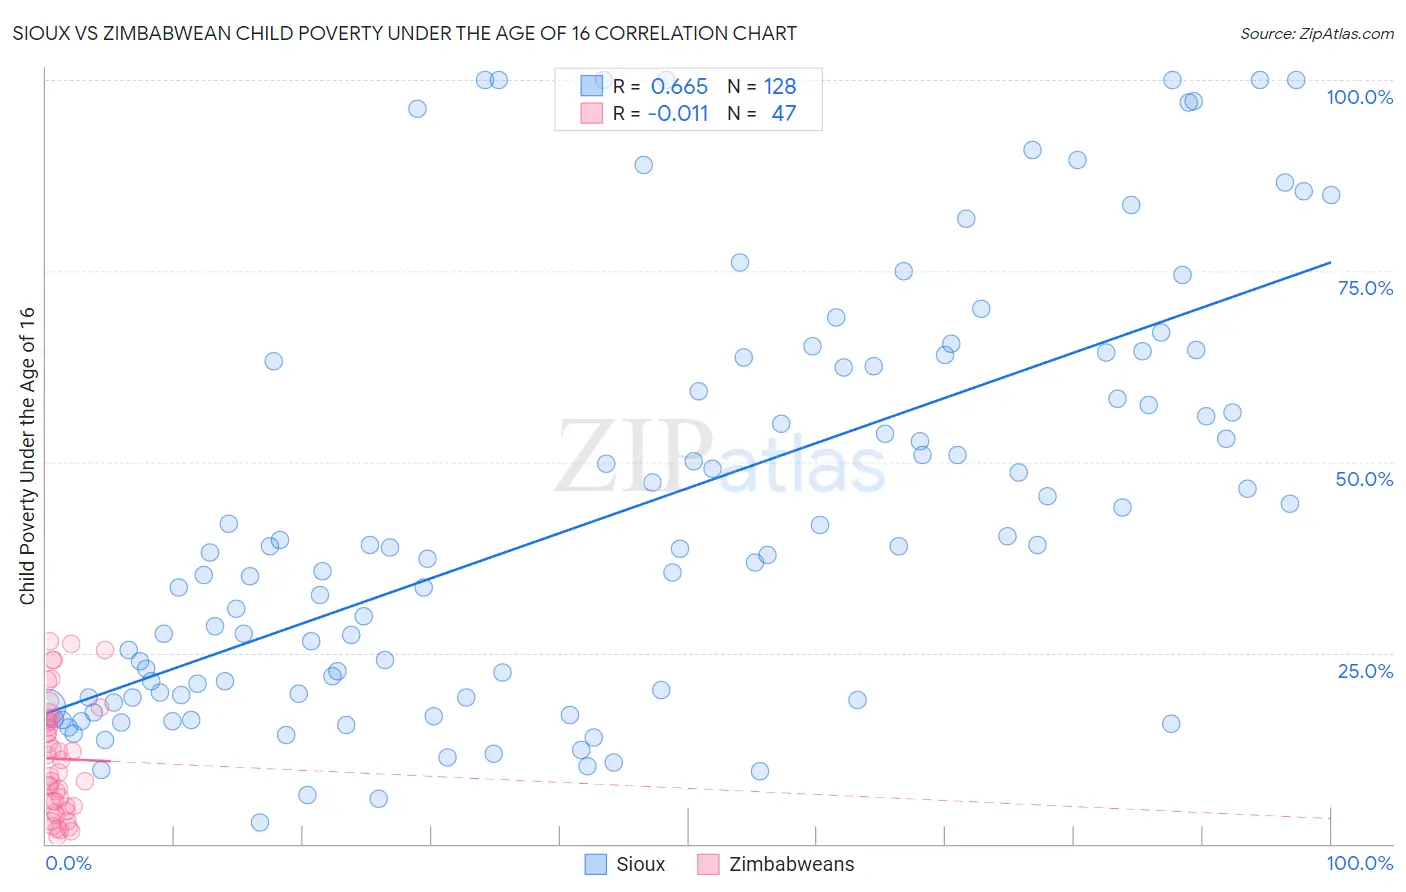 Sioux vs Zimbabwean Child Poverty Under the Age of 16